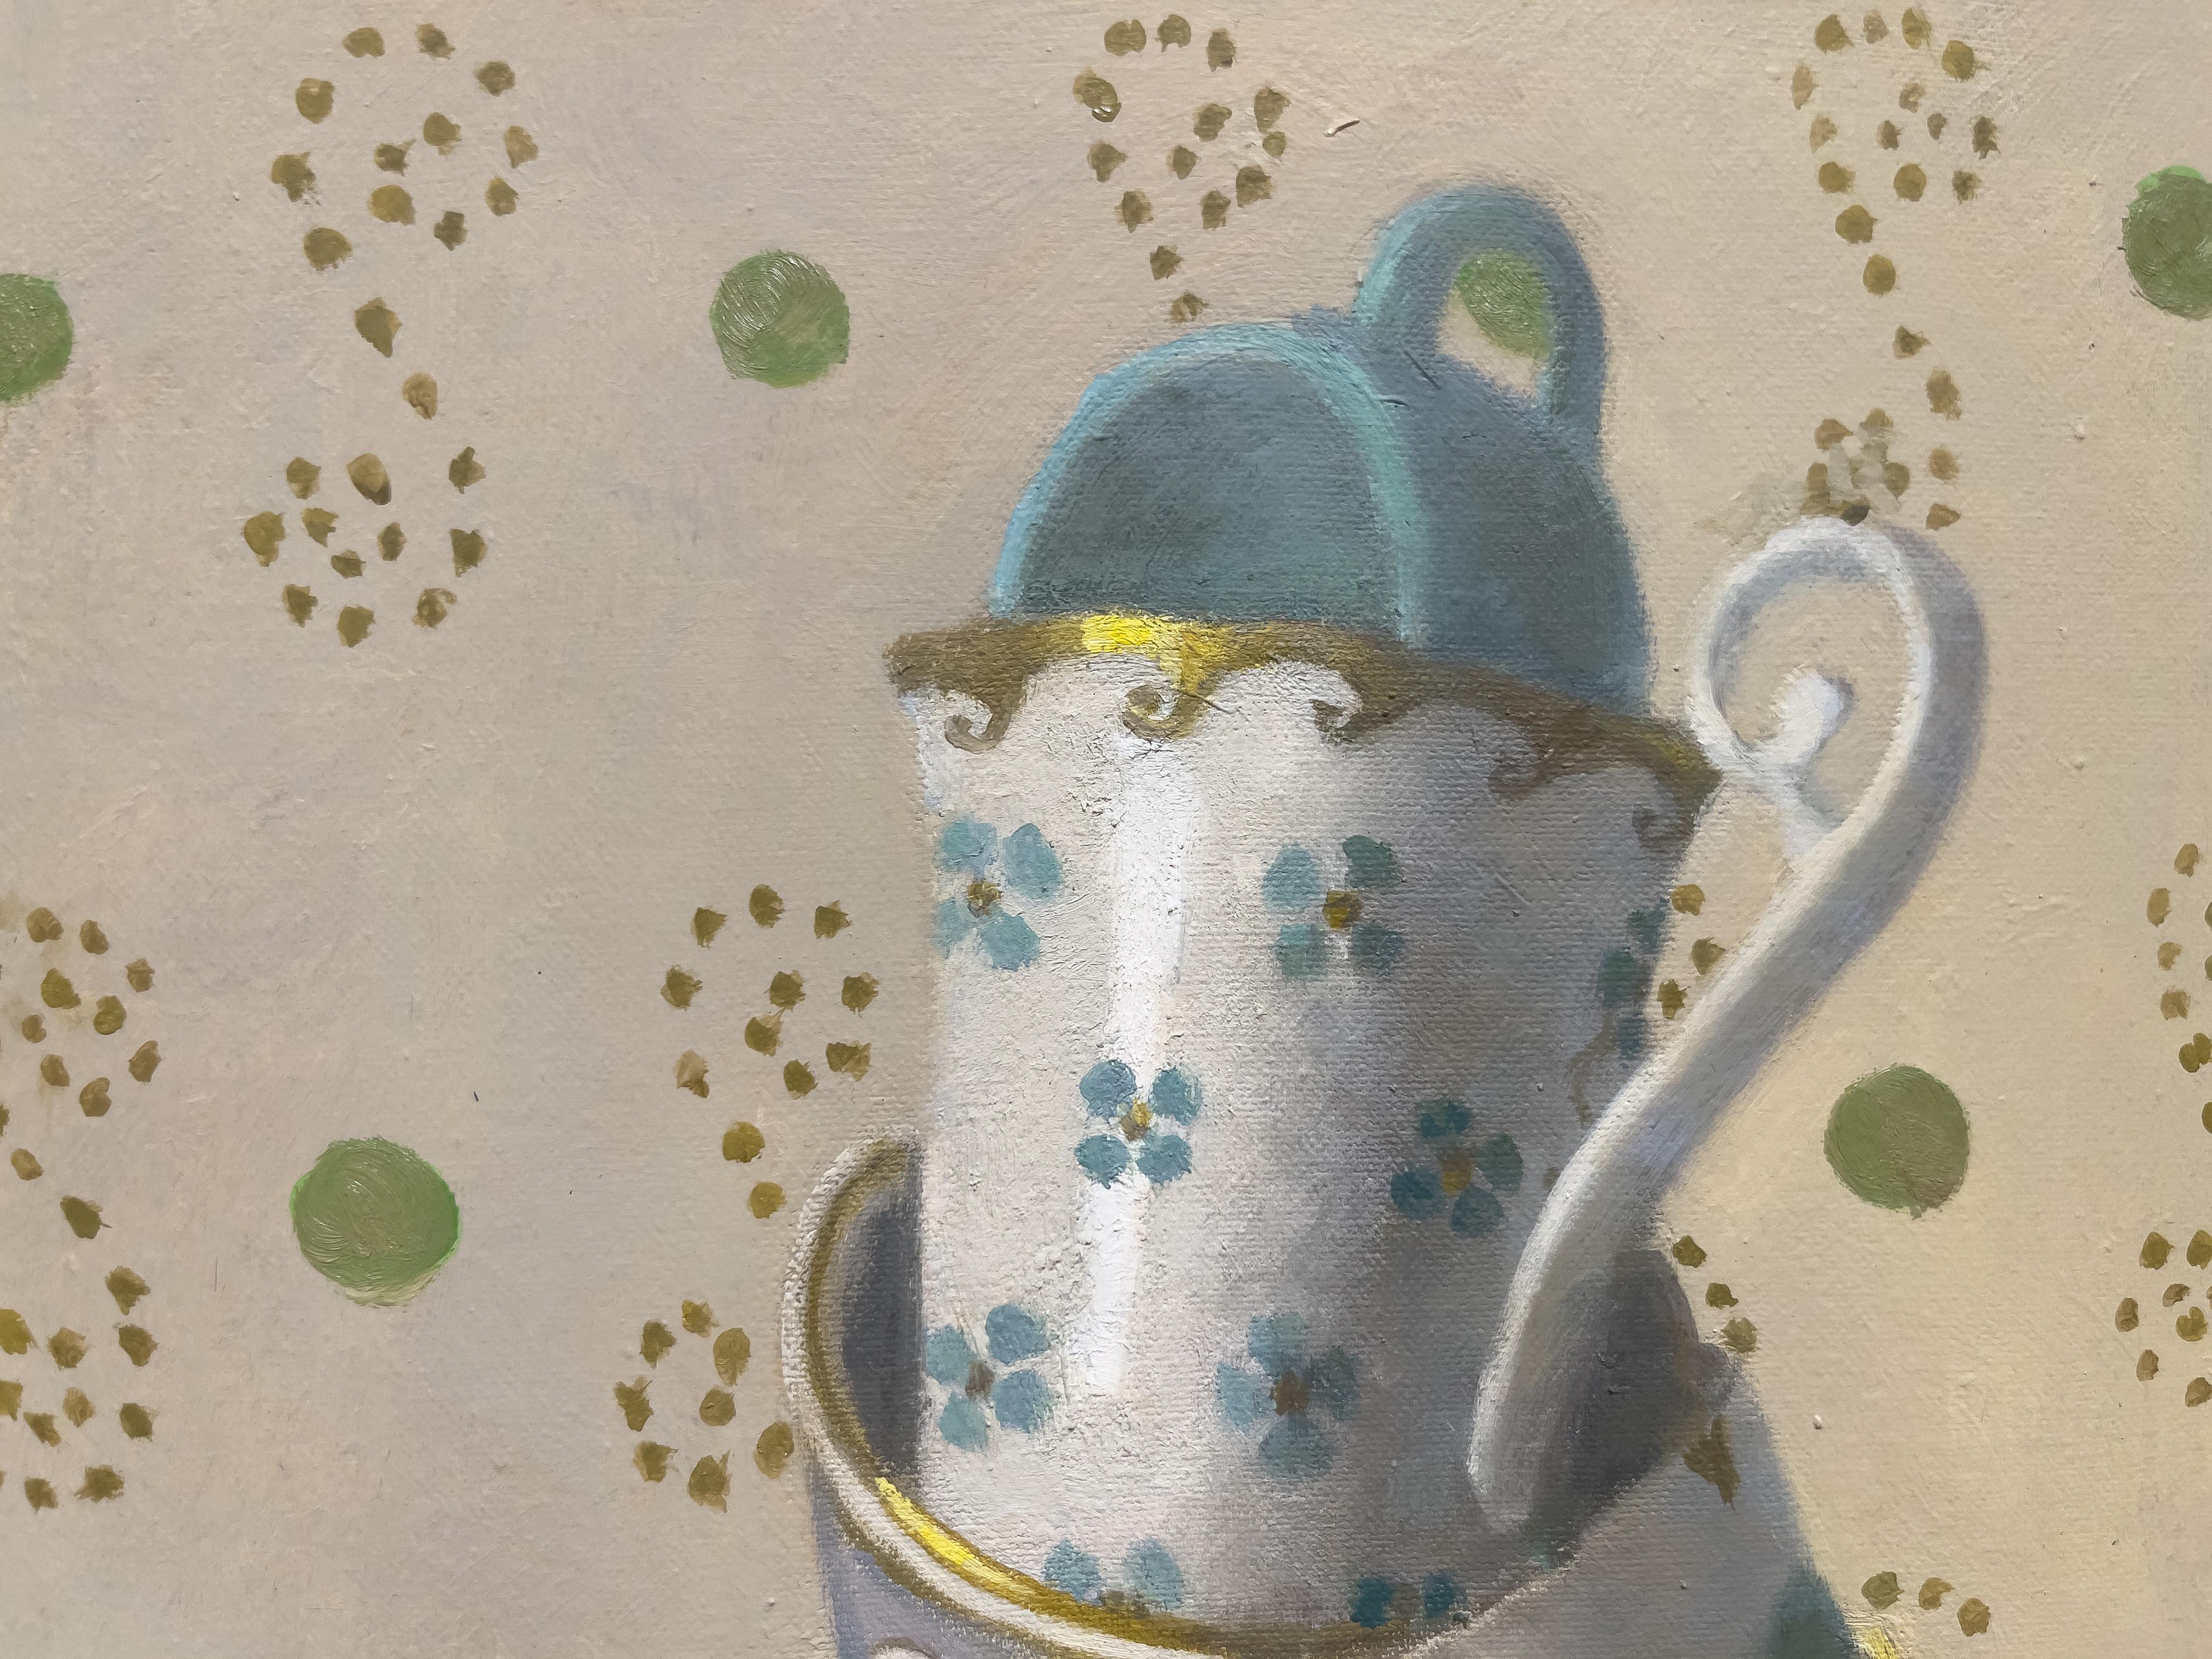 TOWER WITH GOLD SHELL CUP - Still life, teacups, realism - Gray Still-Life Painting by Olga Antonova